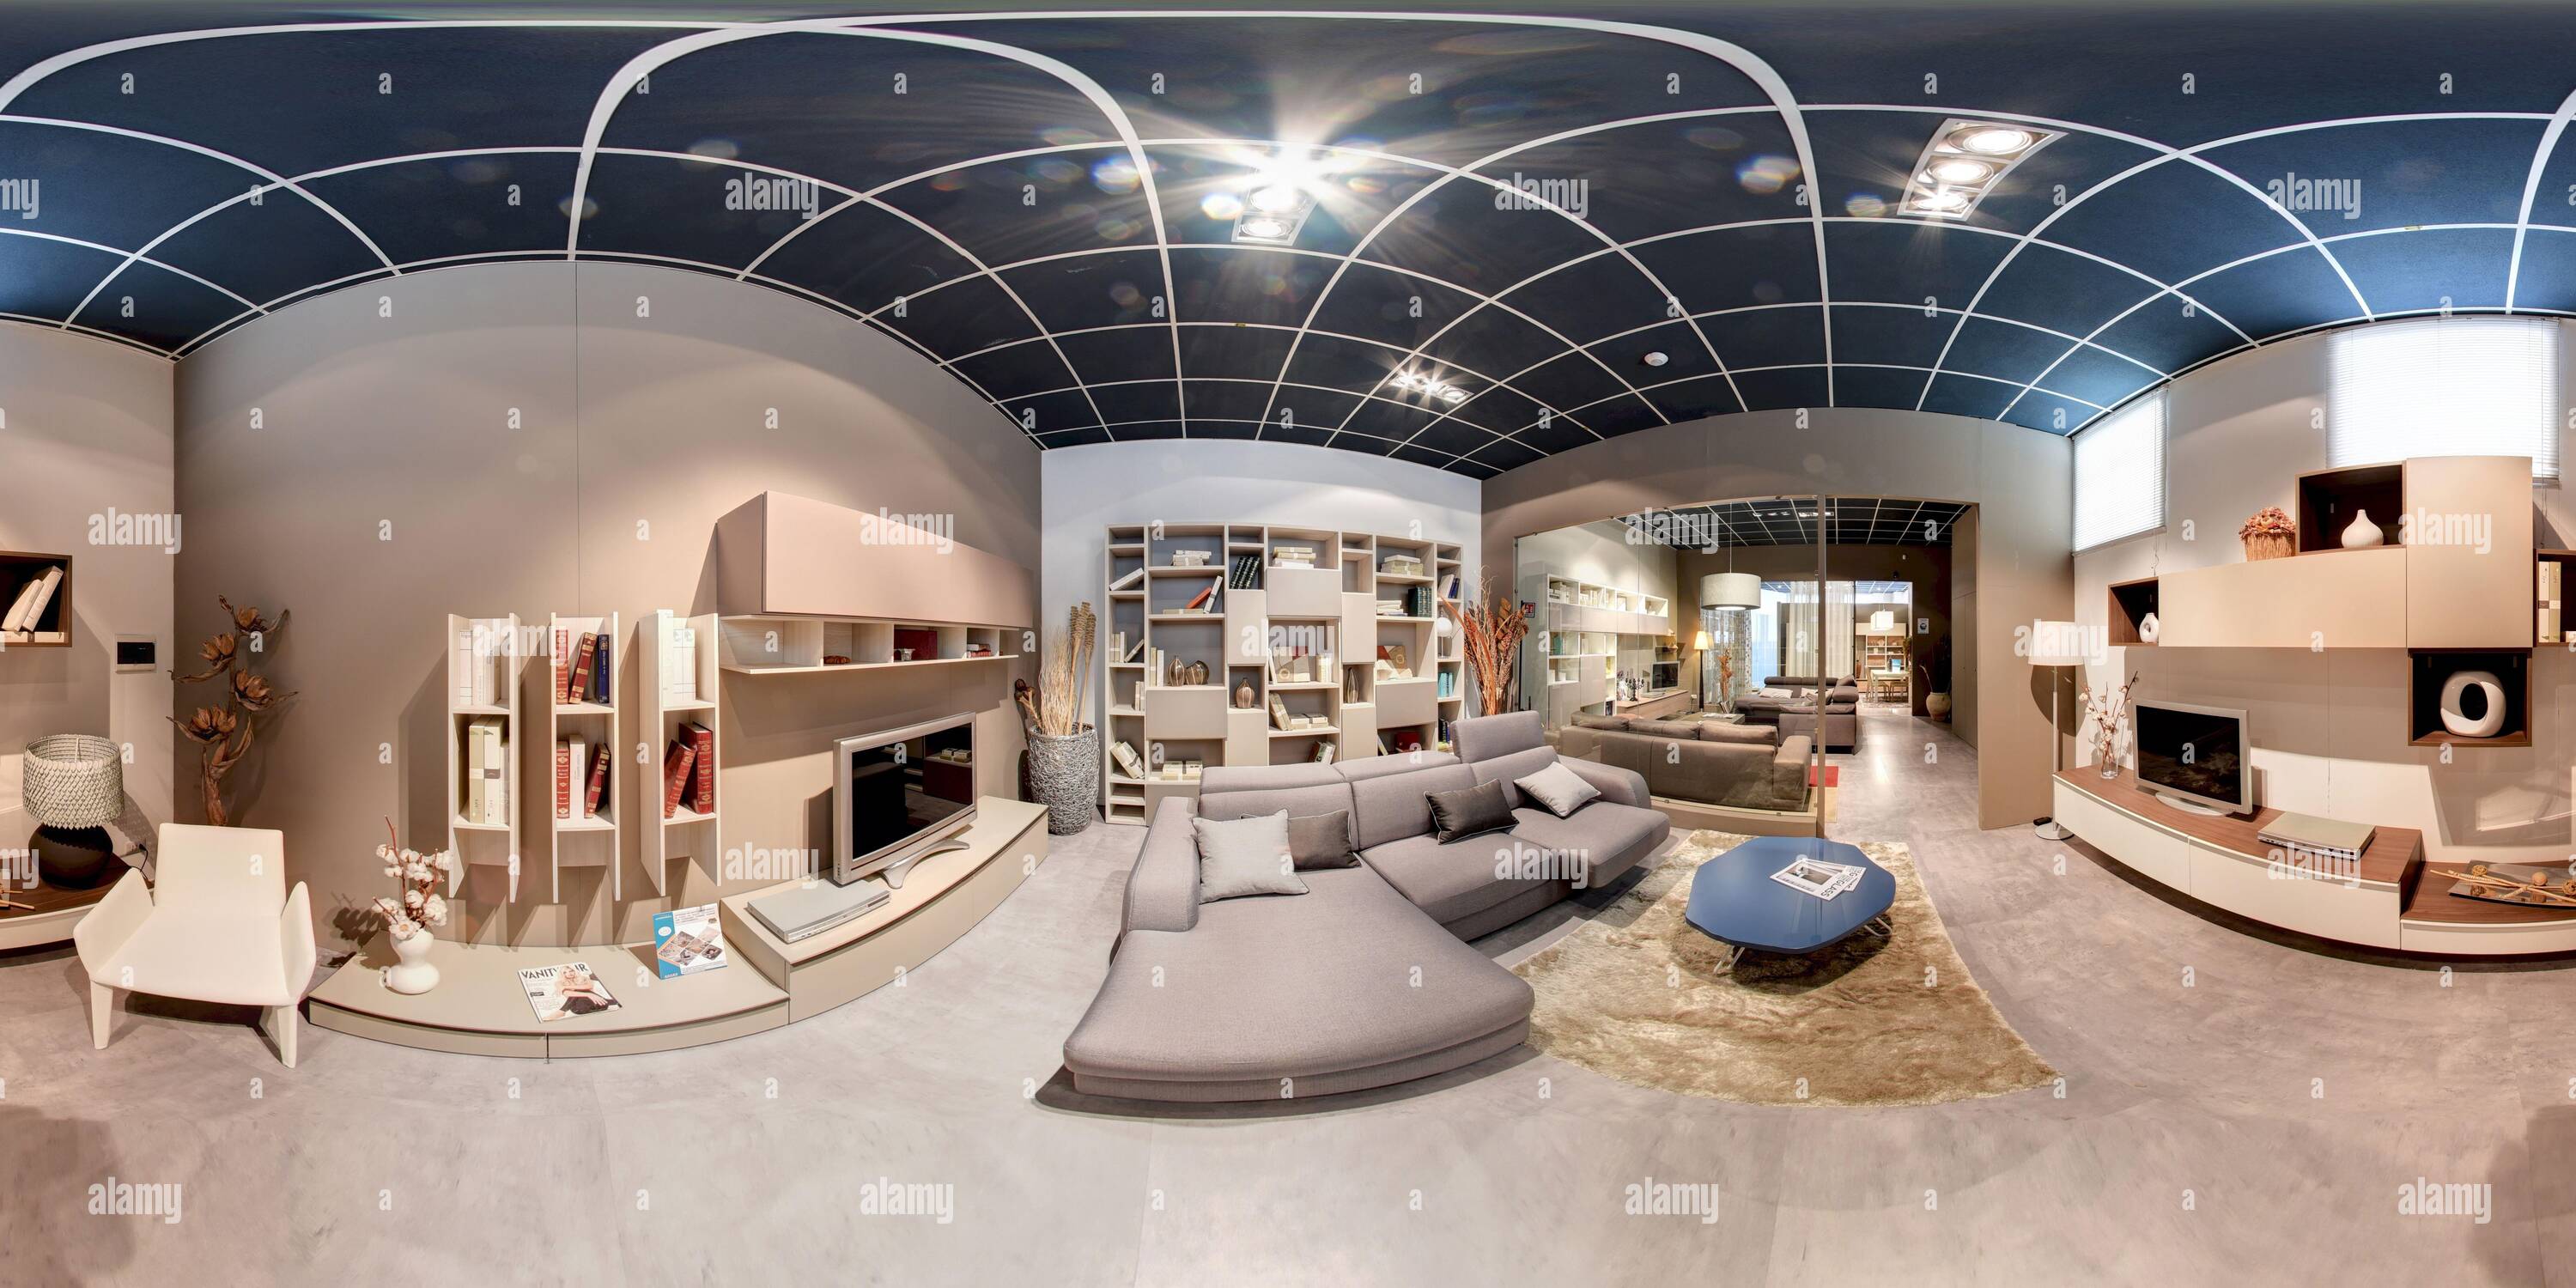 360 degree panoramic view of 360 degree panorama of a modern living room interior in an upmarket property with neutral toned decor and personal effects